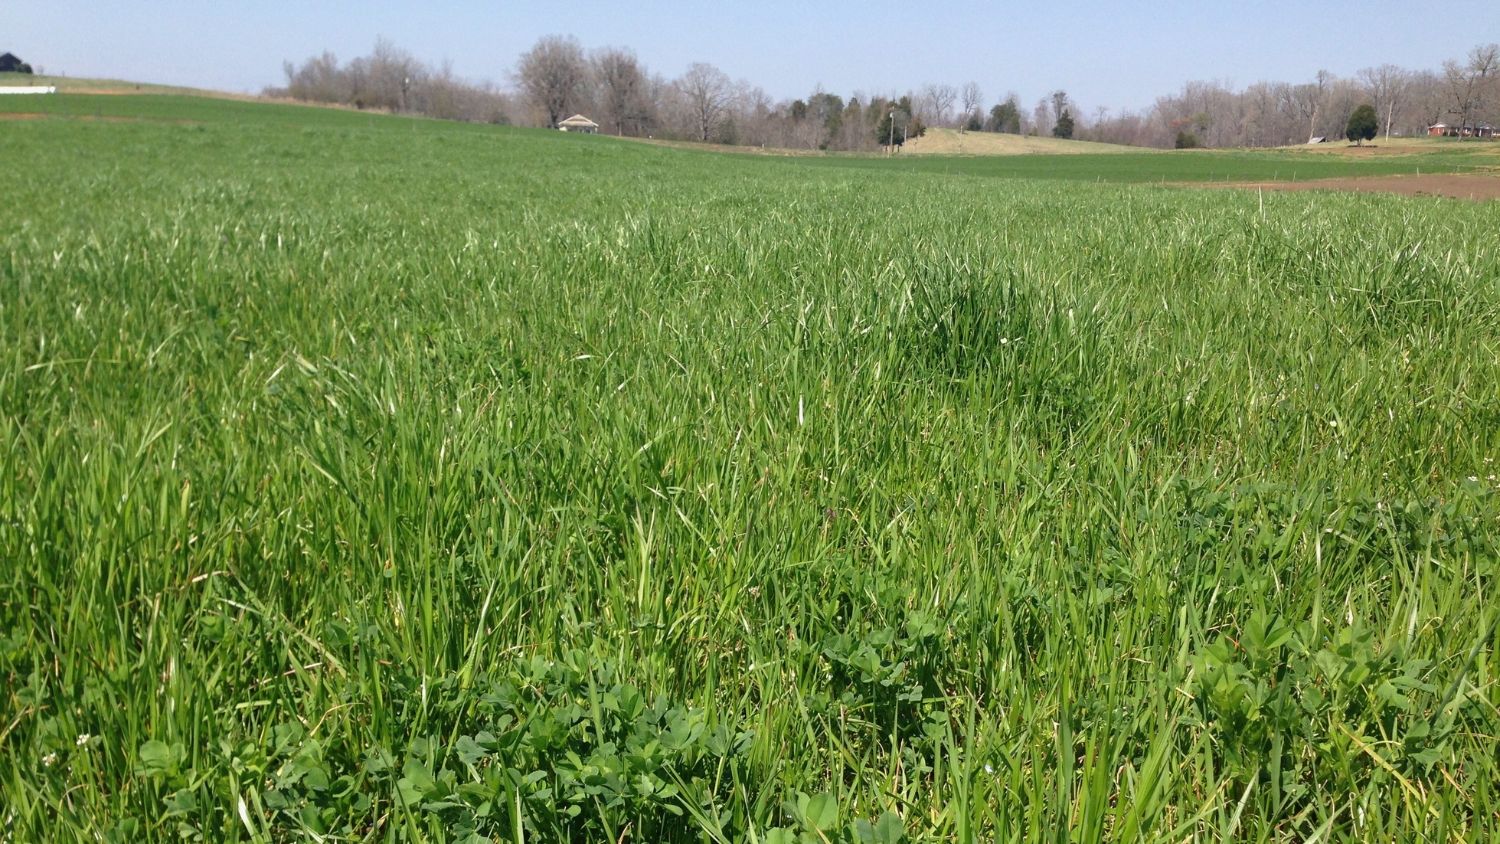 A pasture with a mixed of forage varieties